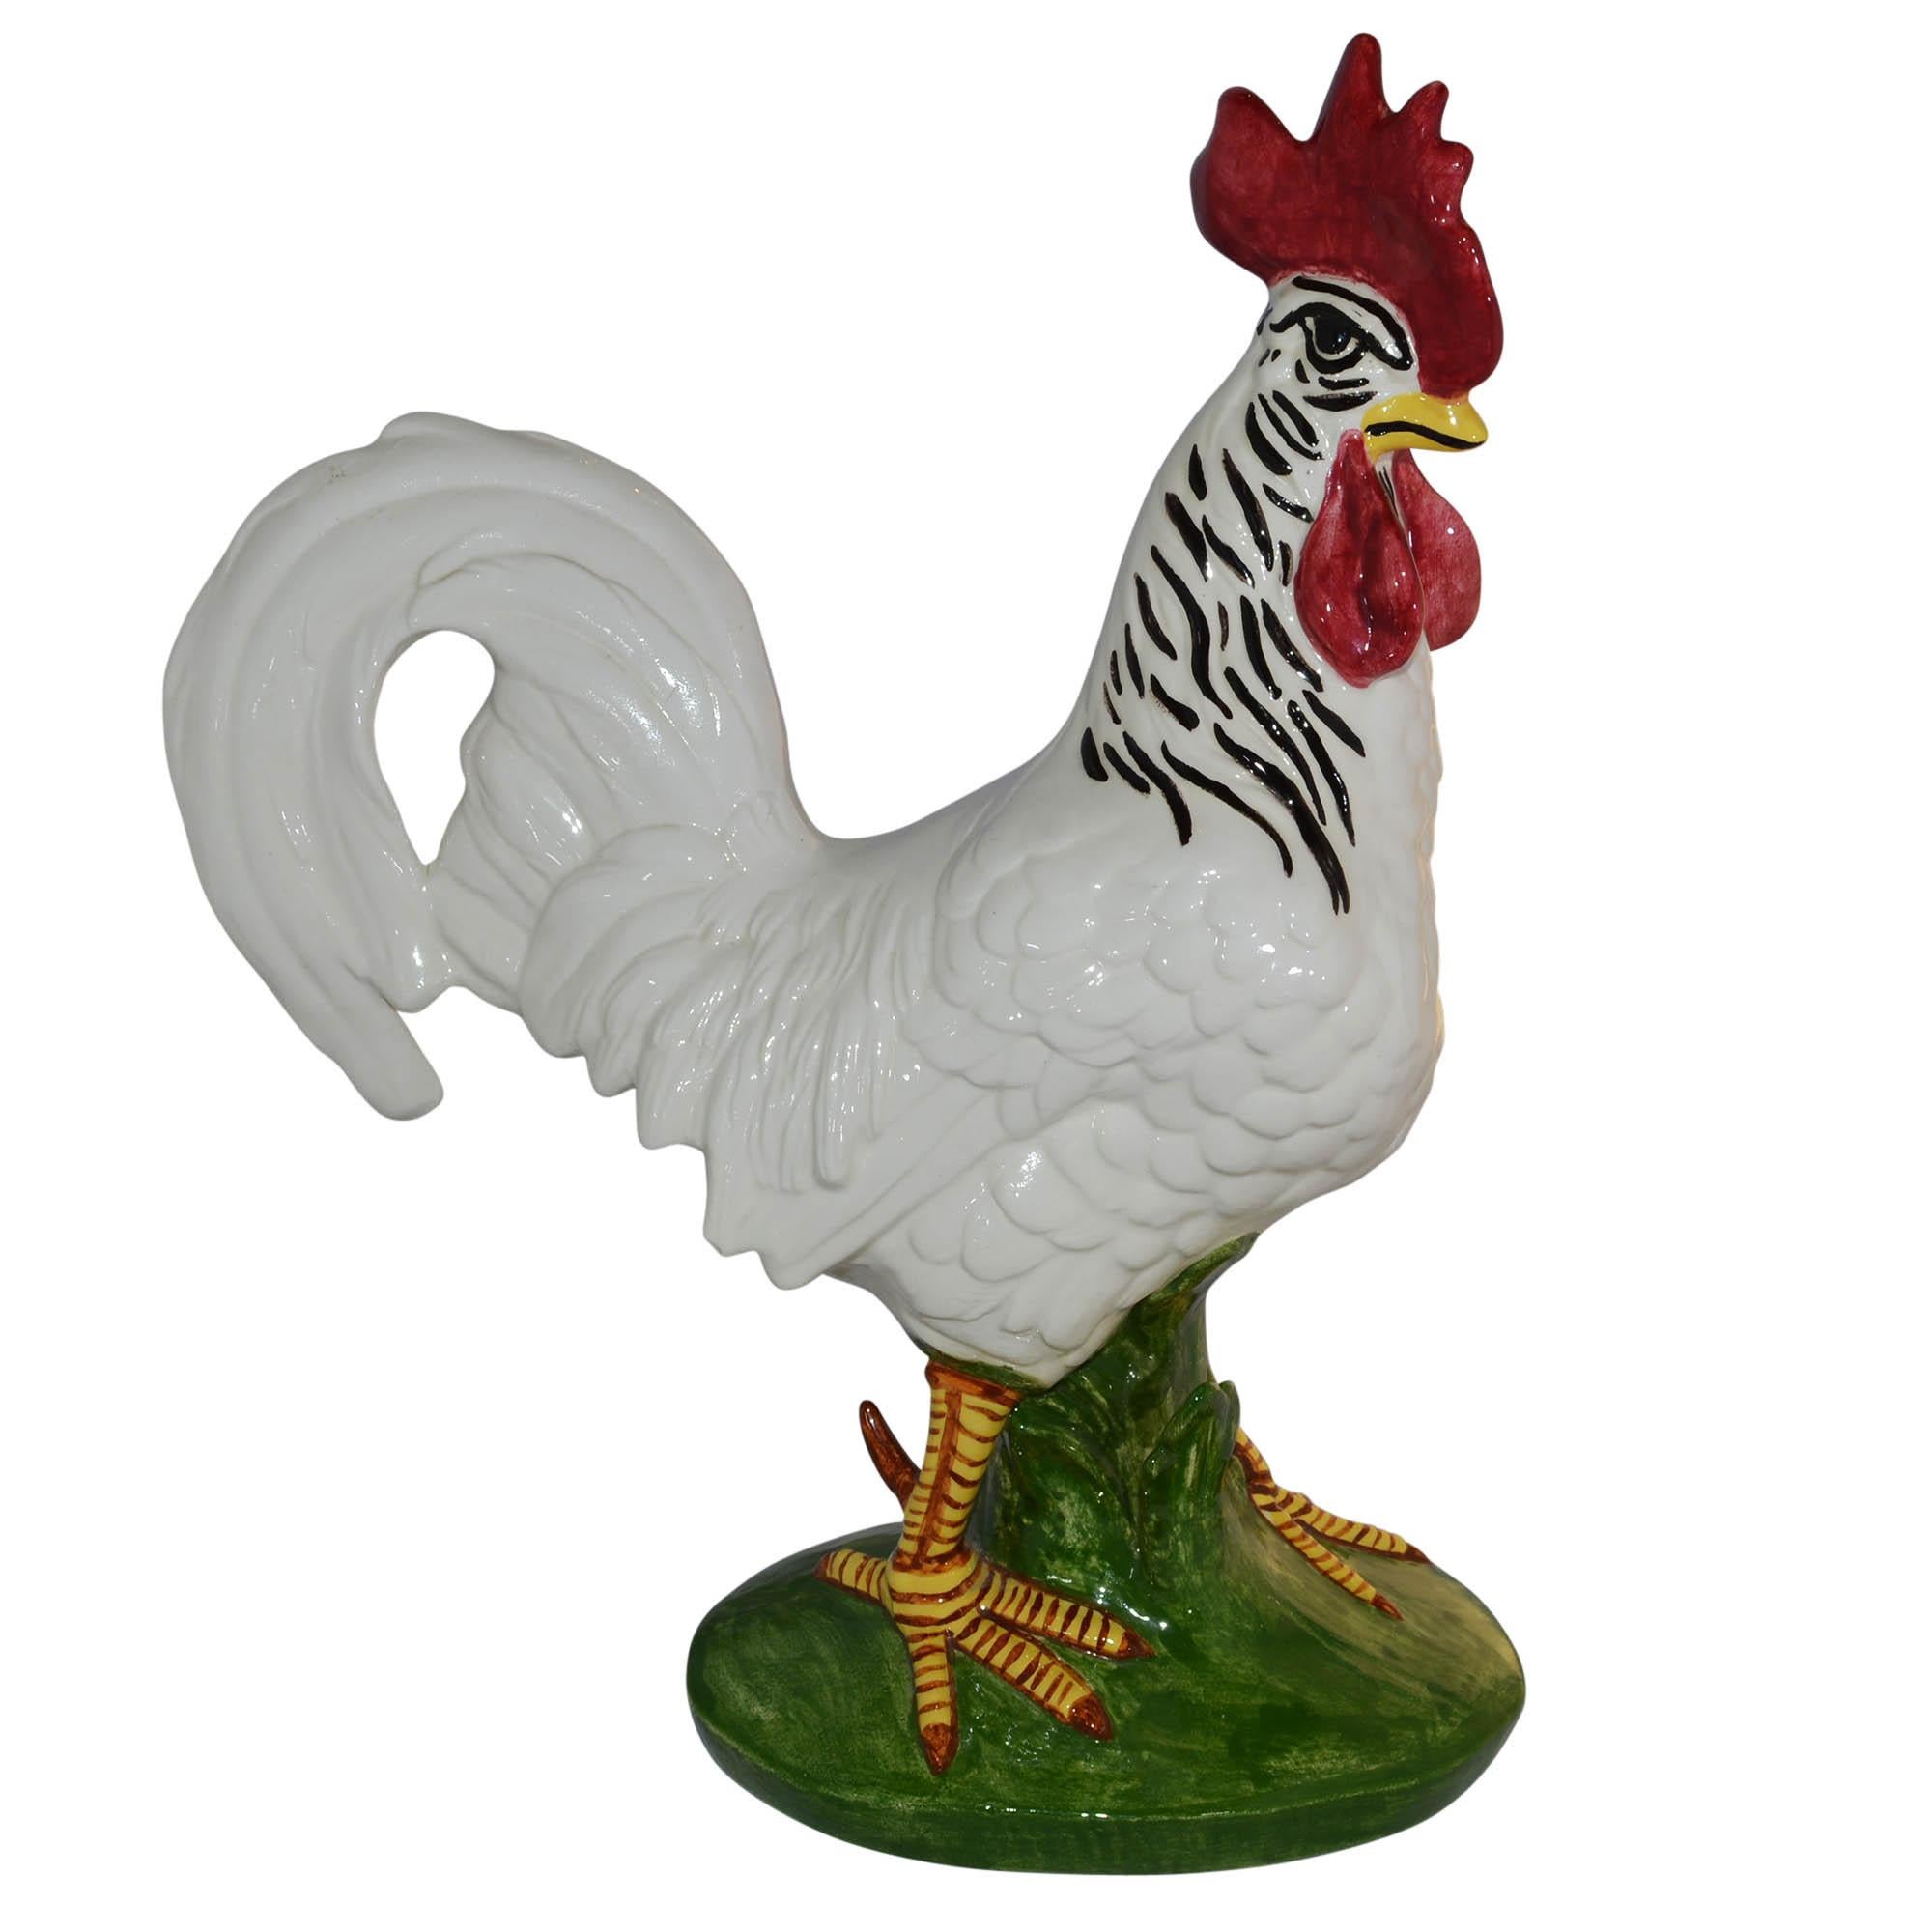 Vintage Pennsbury Pottery Rooster Figurine White Green Base